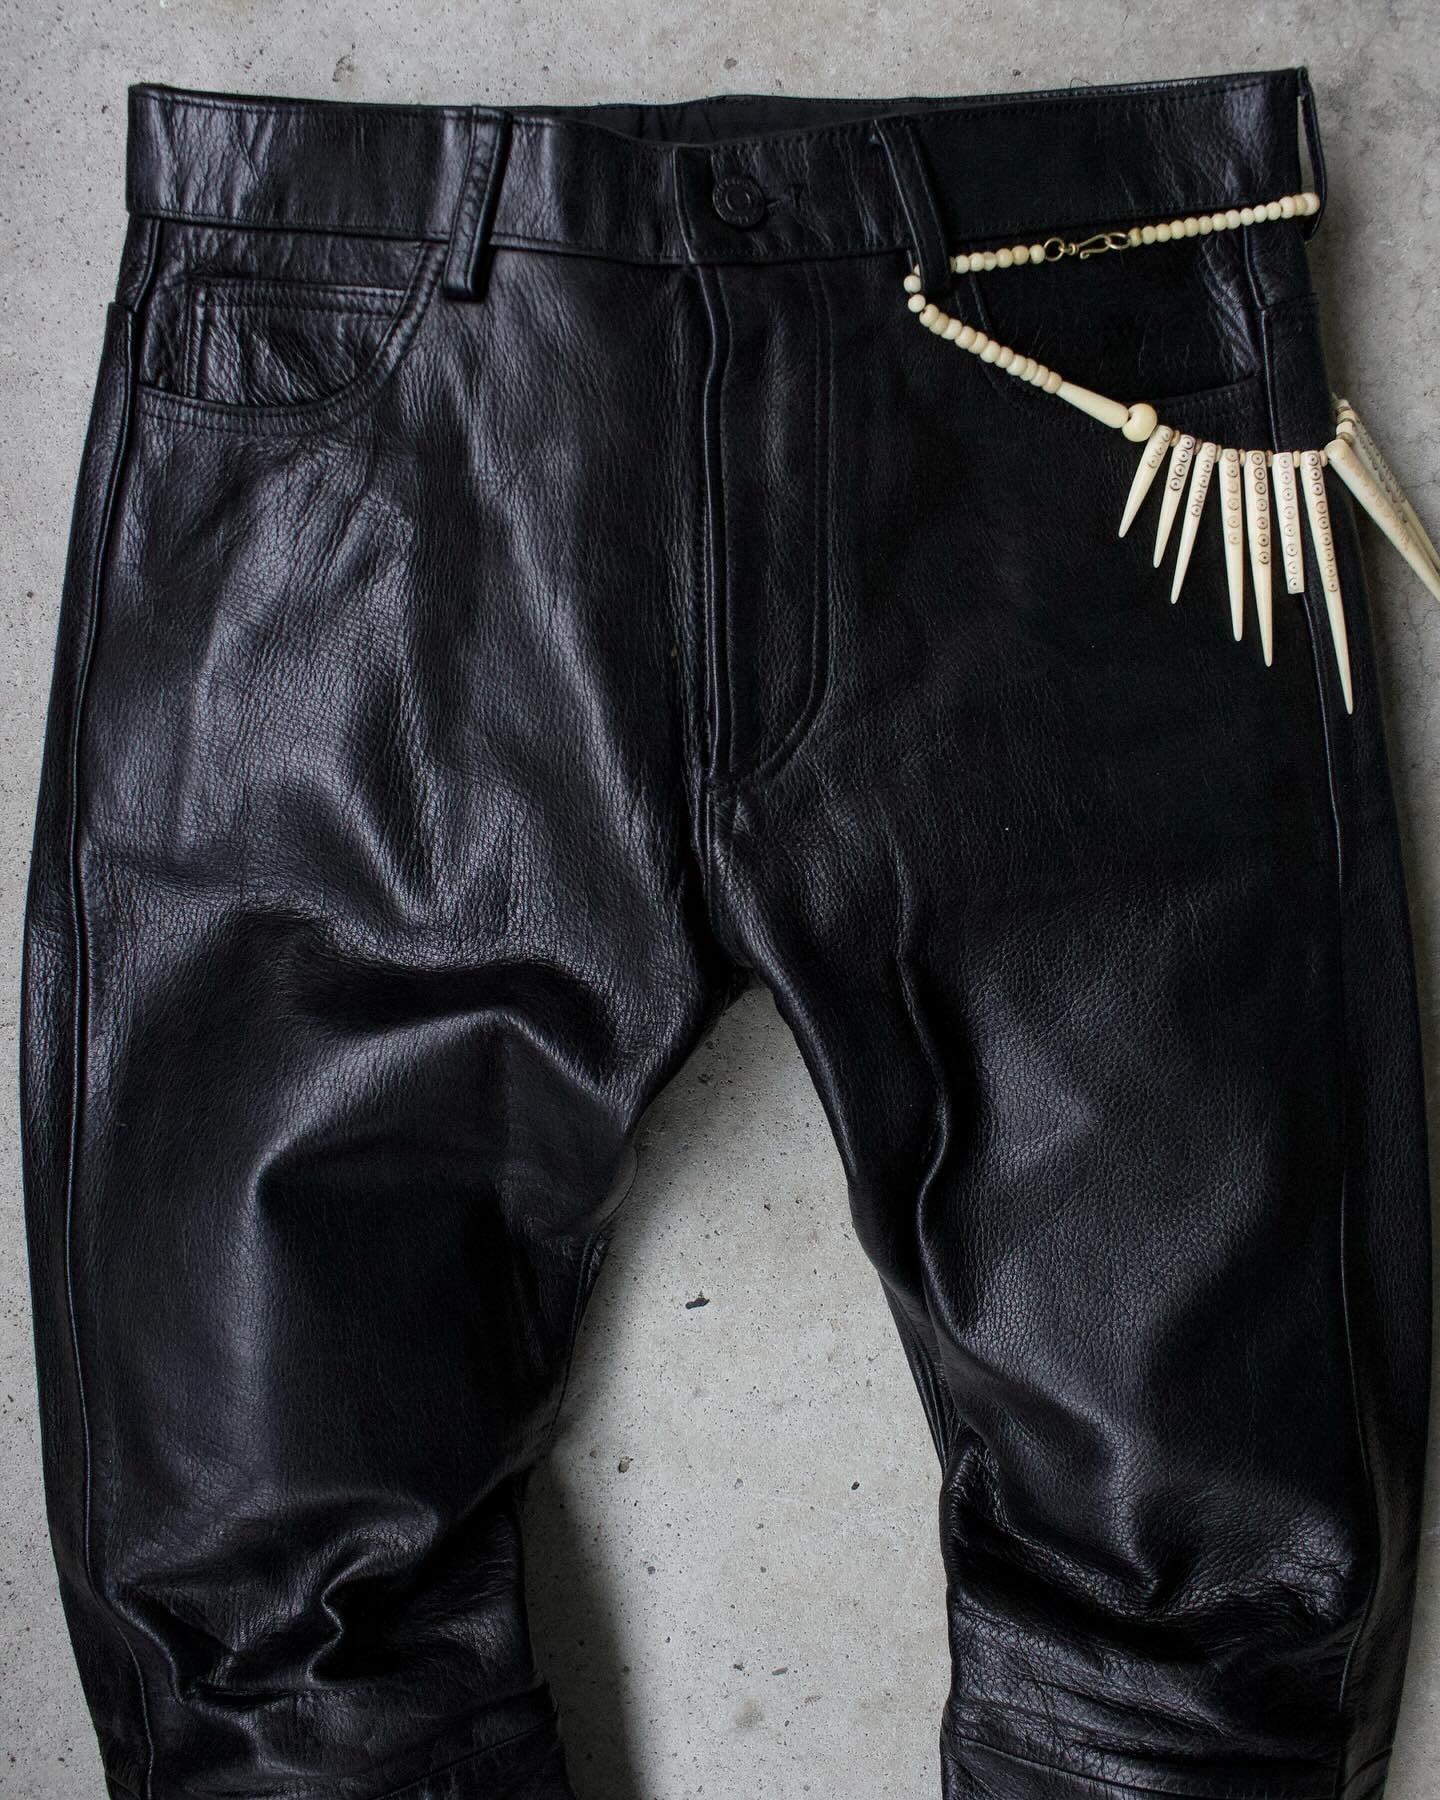 Lad Musician AW08 Night Rider Cowhide Leather Pants